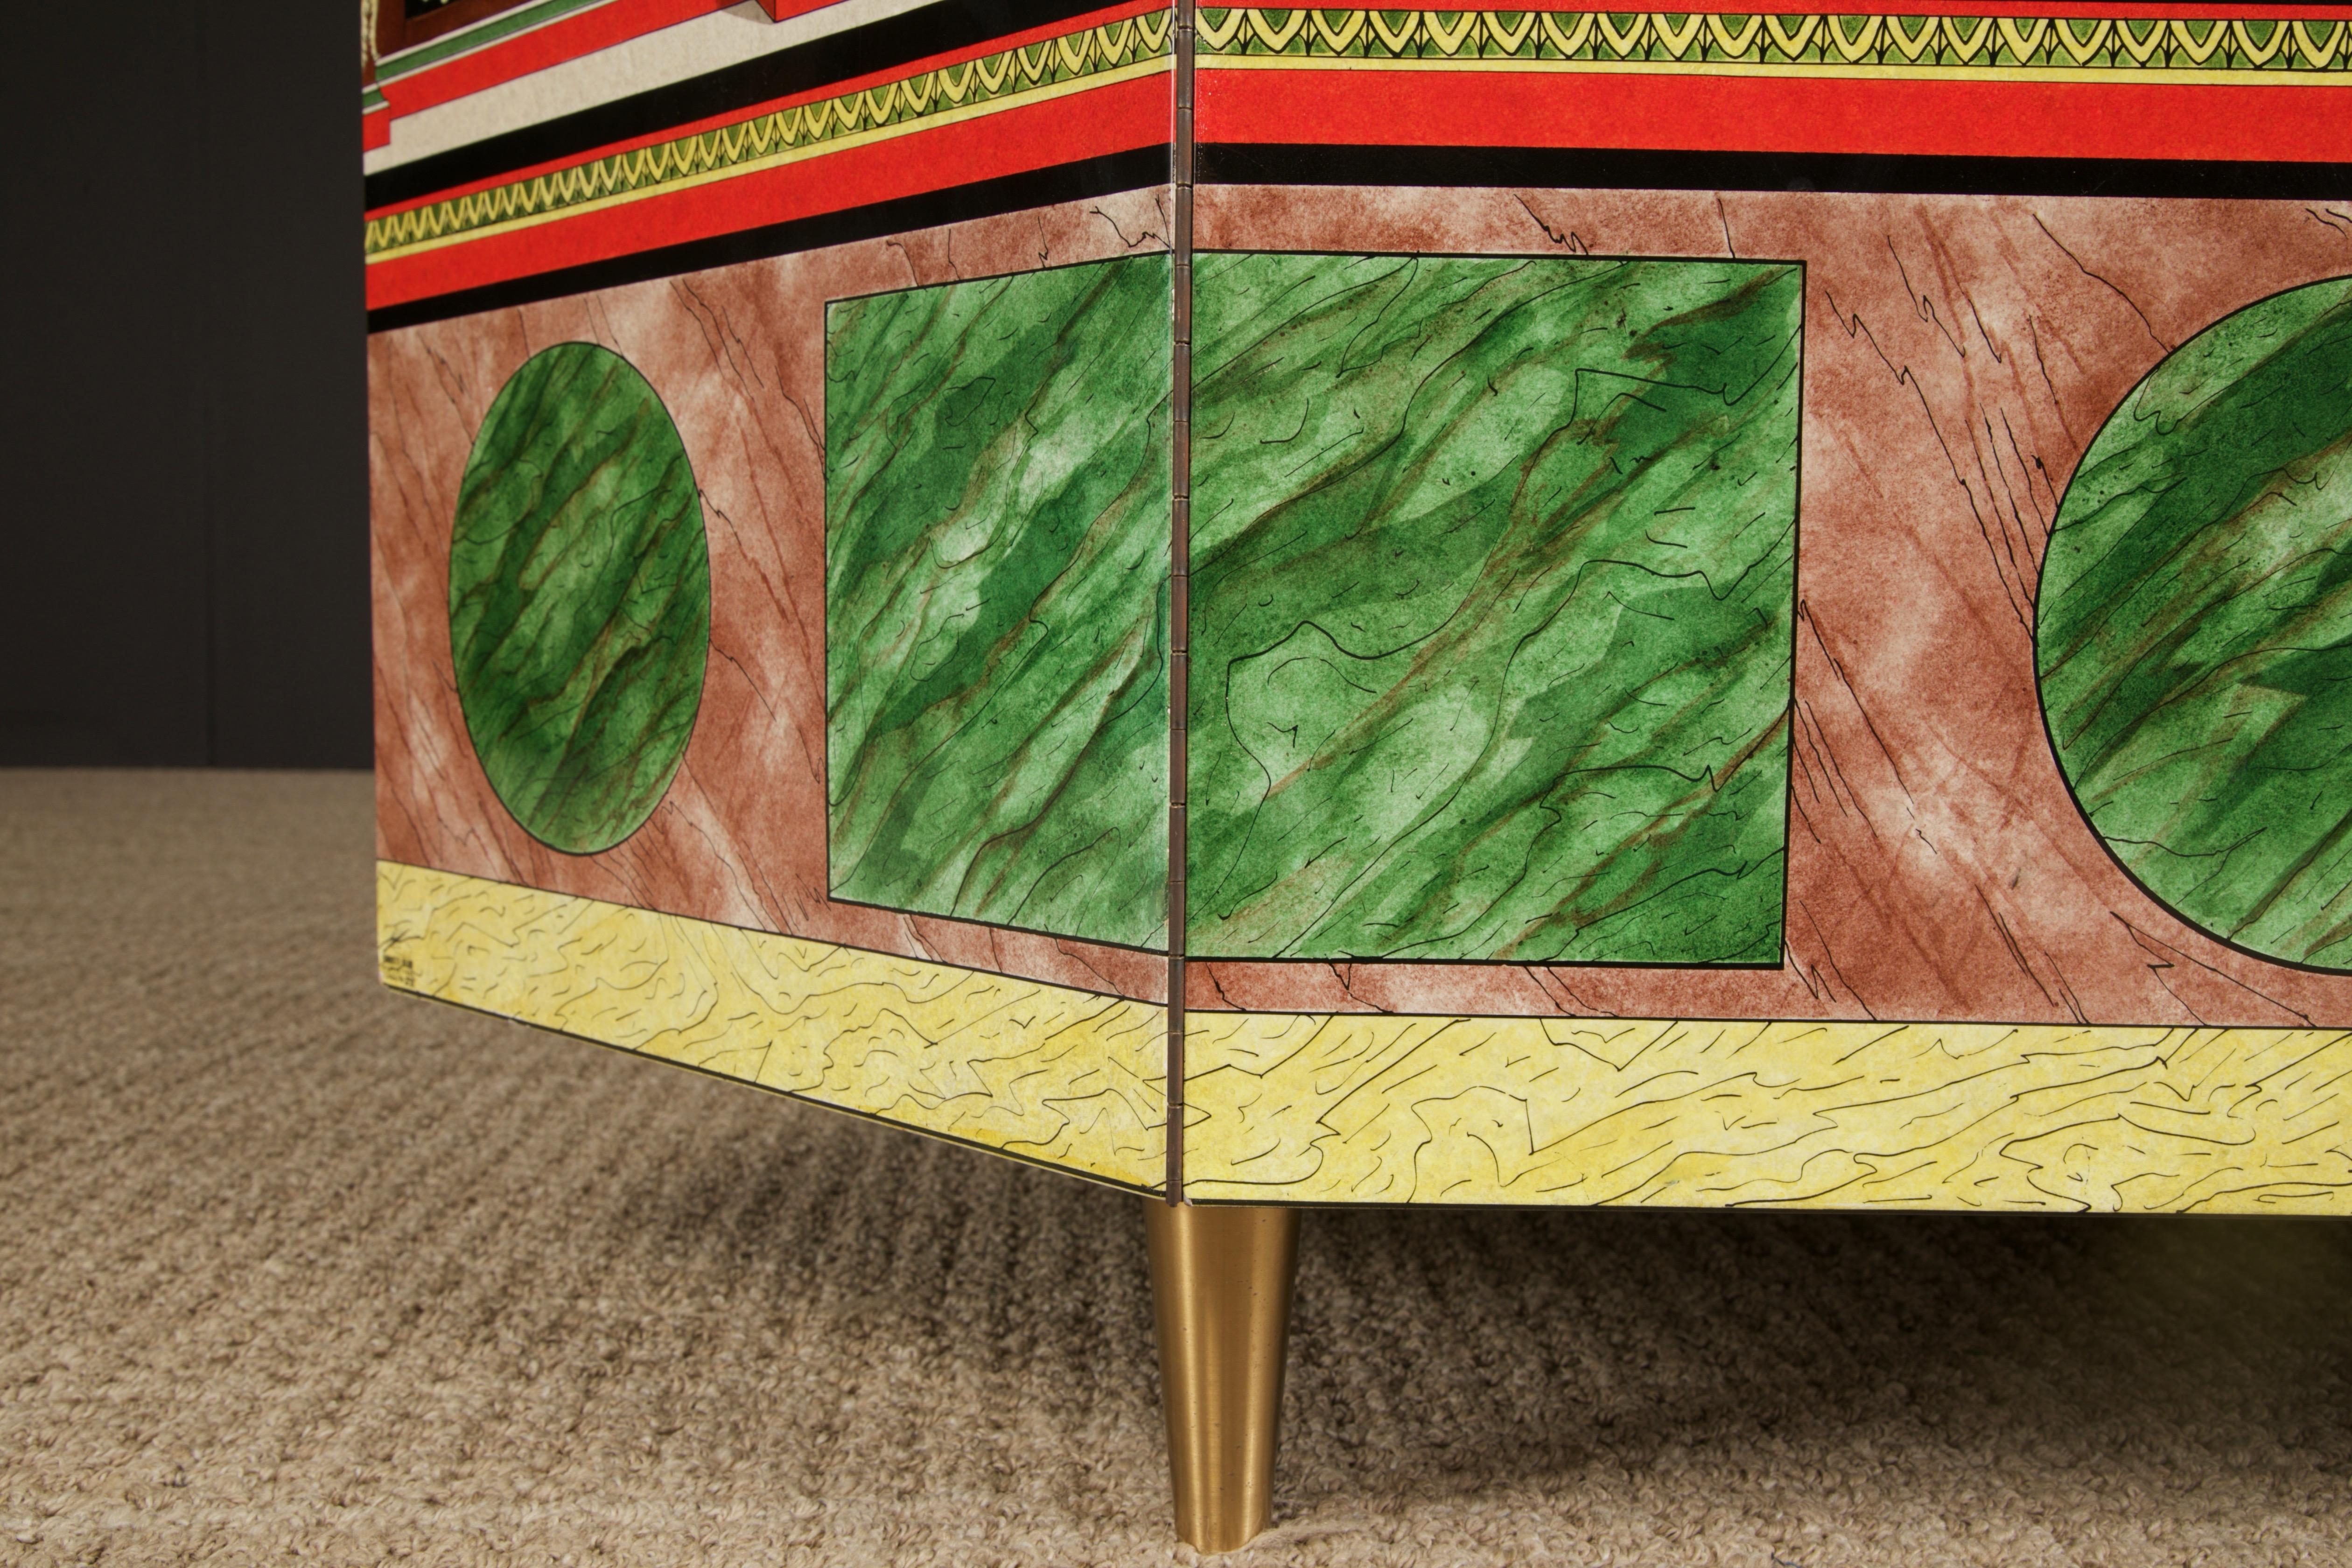 'Pompeiana' Corner Cabinet by Piero Fornasetti, Italy, 2 of 2 in 1988, Signed  For Sale 8